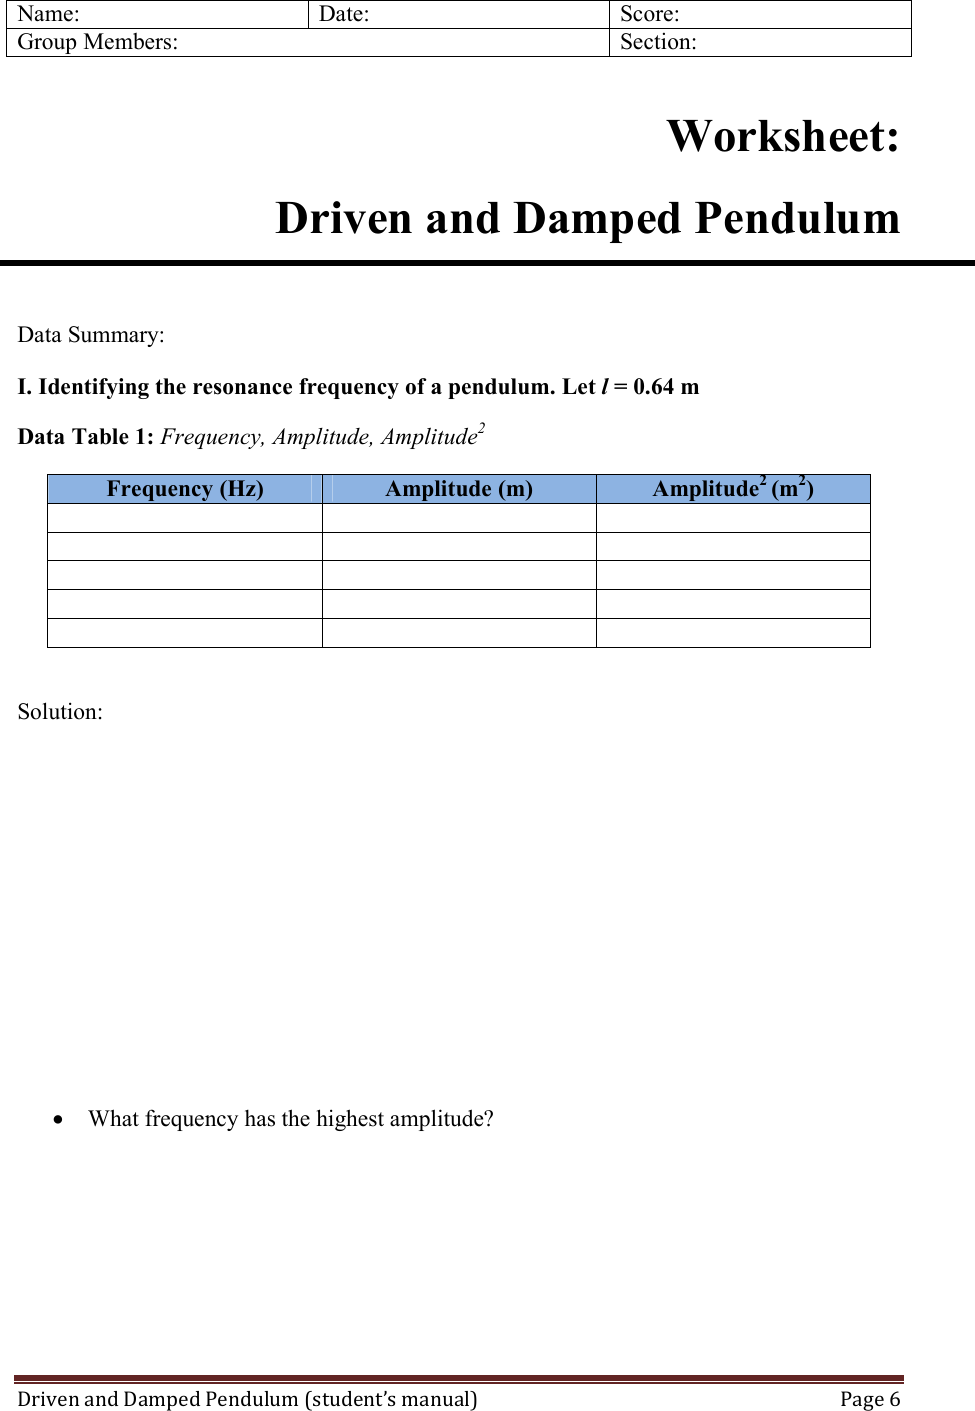 Page 6 of 10 - 01 Driven And Damped Pendulum Experiment Manual